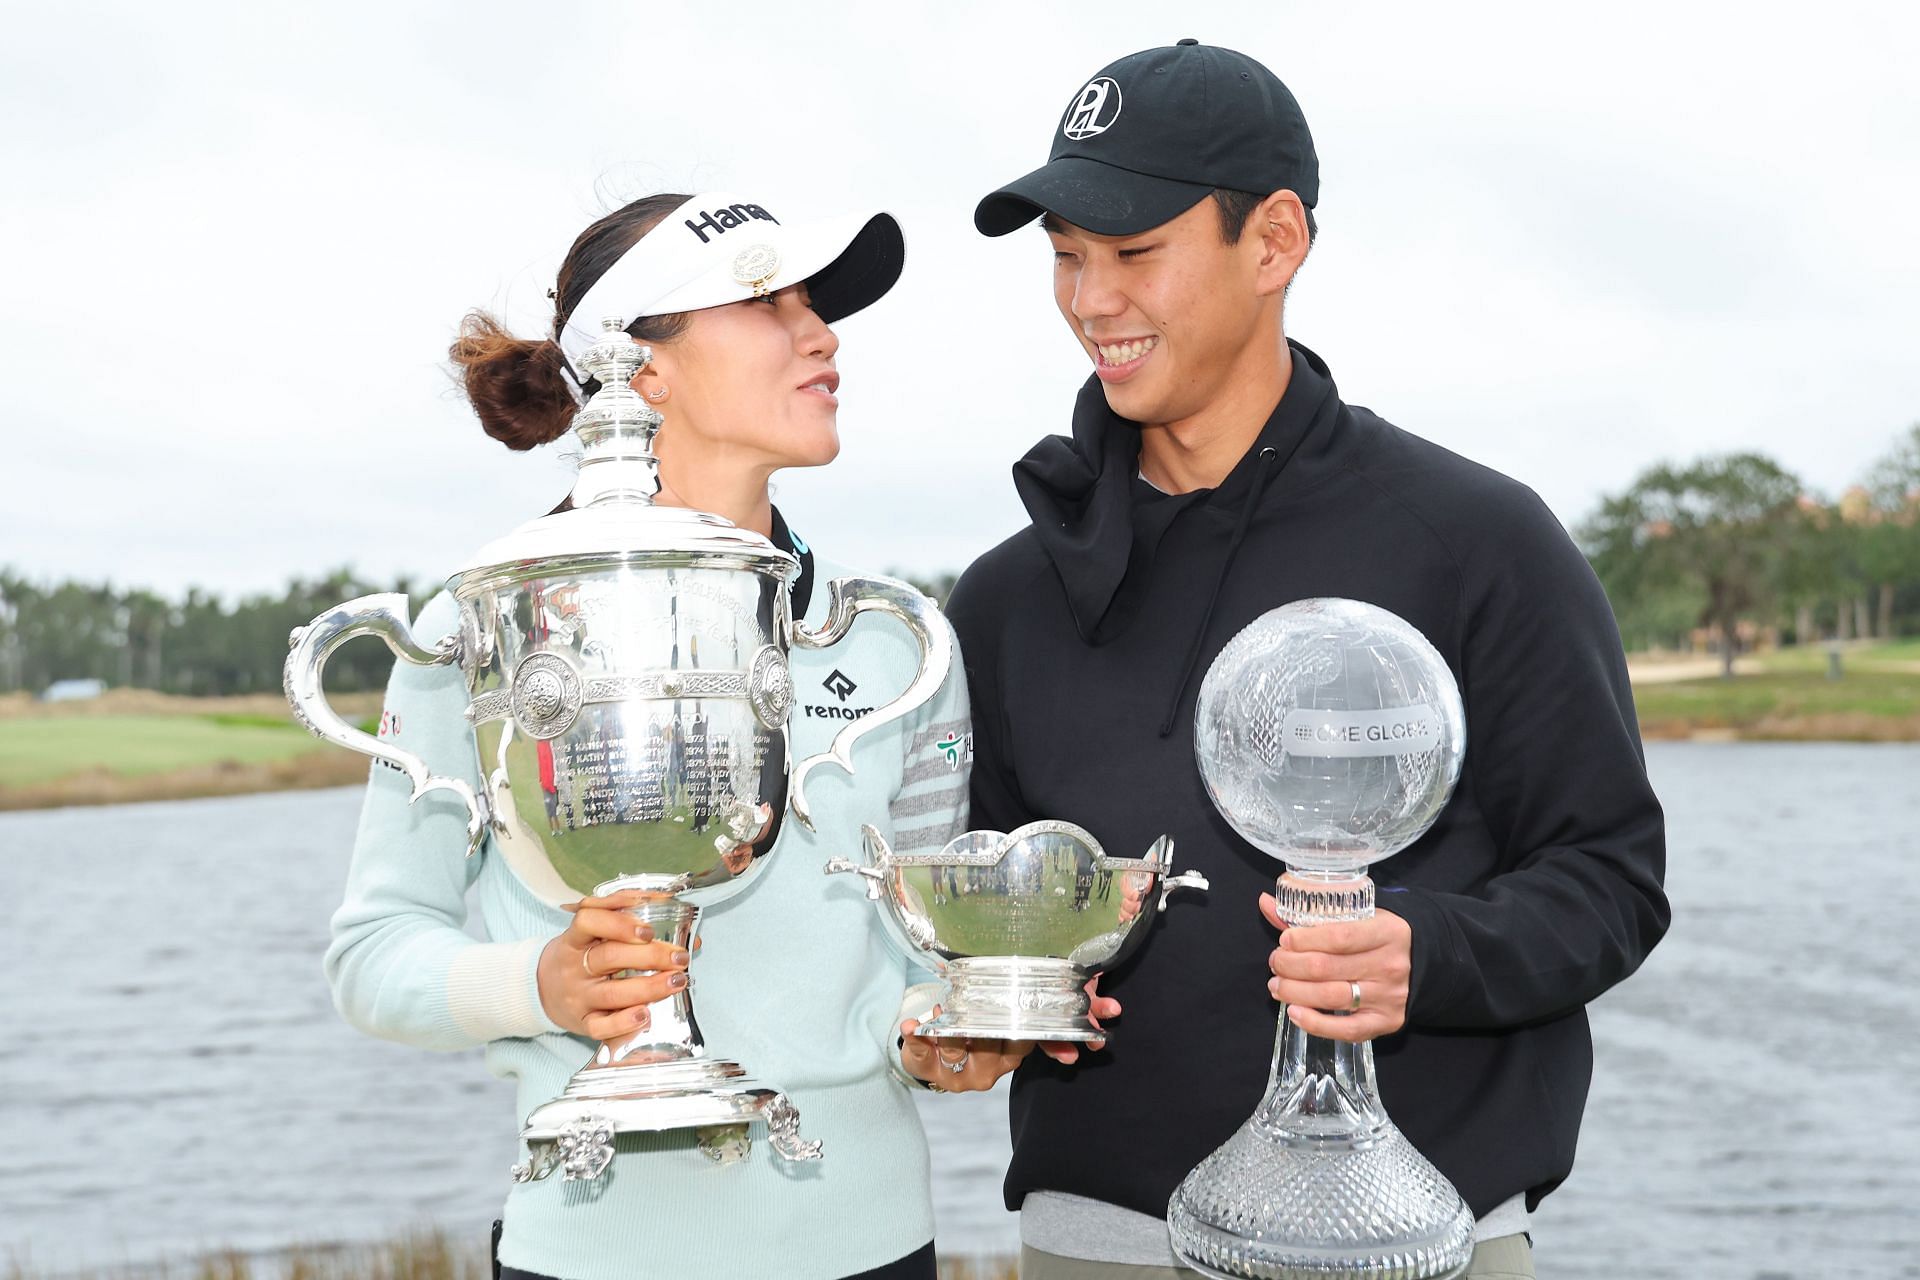 Lydia Ko and husband Jun Chung at the CME Group Tour Championship - Final Round (Image via Michael Reaves/Getty Images)